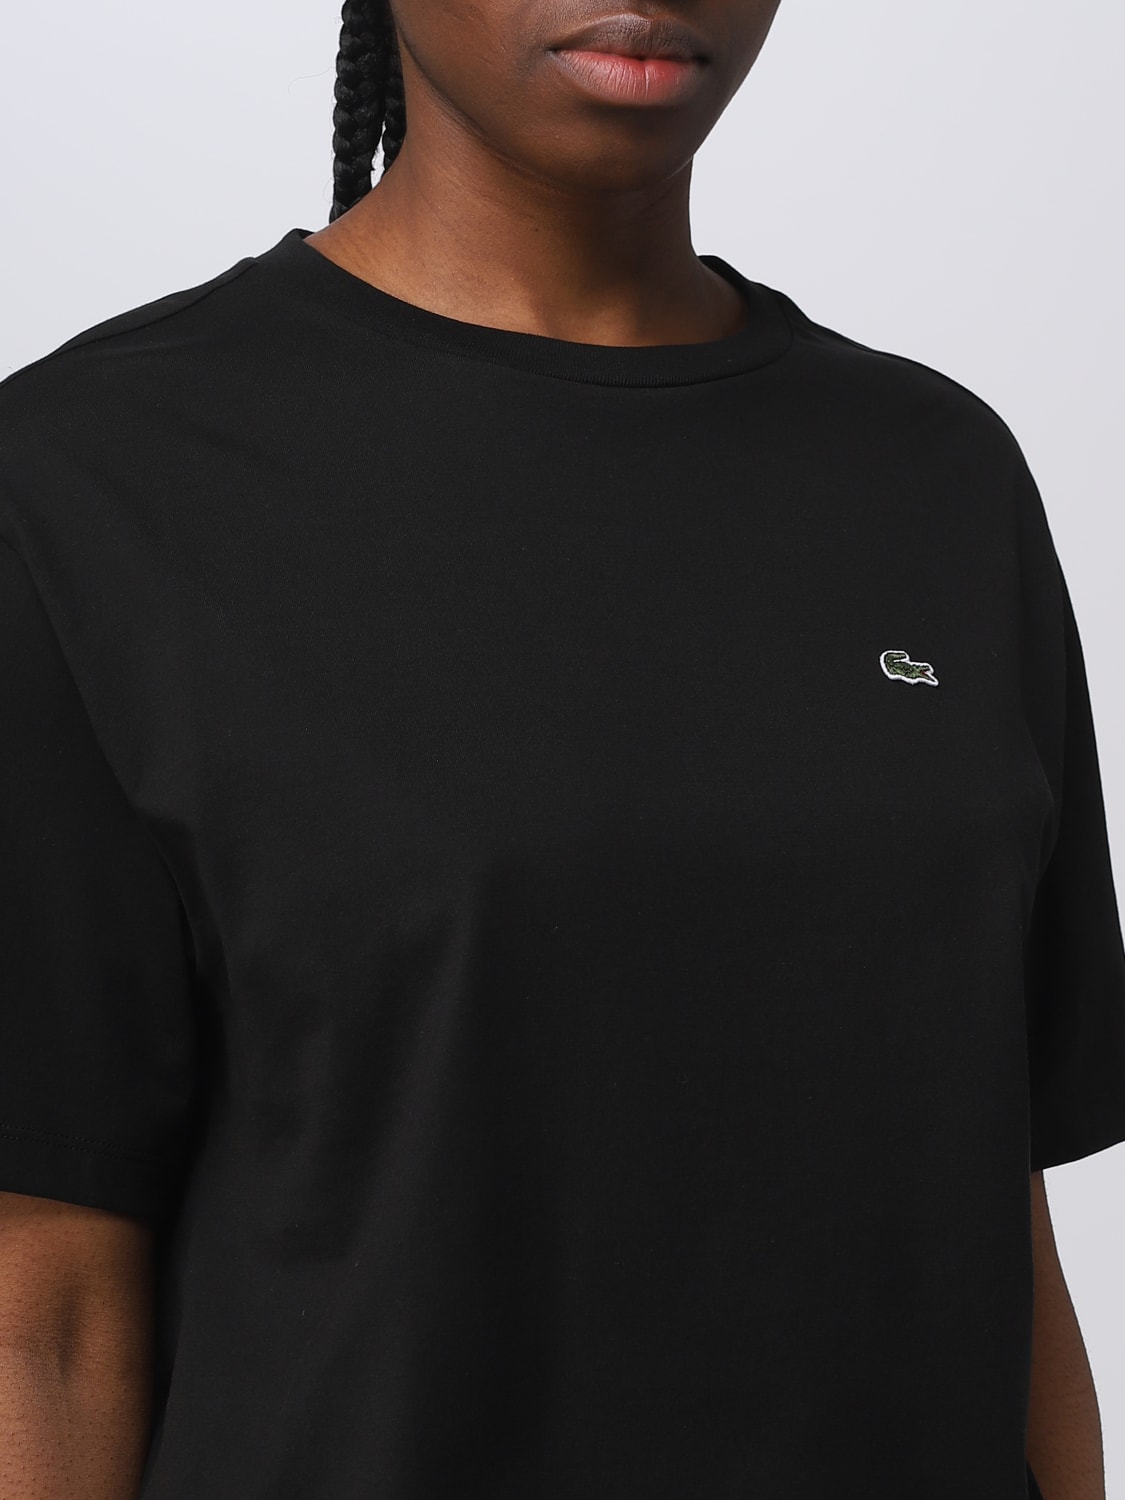 LACOSTE: t-shirt for woman - Black | Lacoste t-shirt TF5441 online on